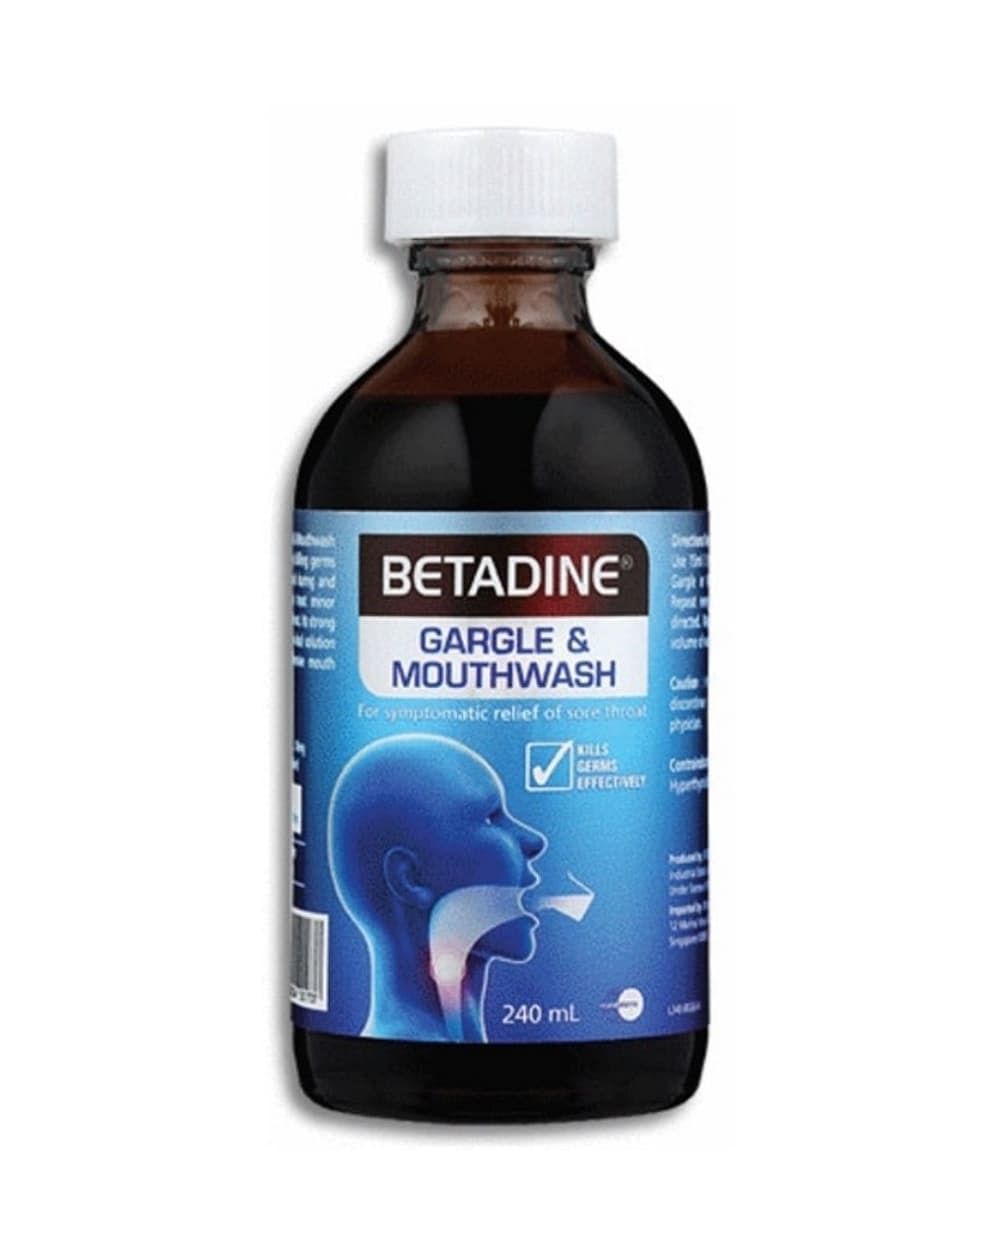 How to Use Betadine Gargle & What Are Its Benefits?